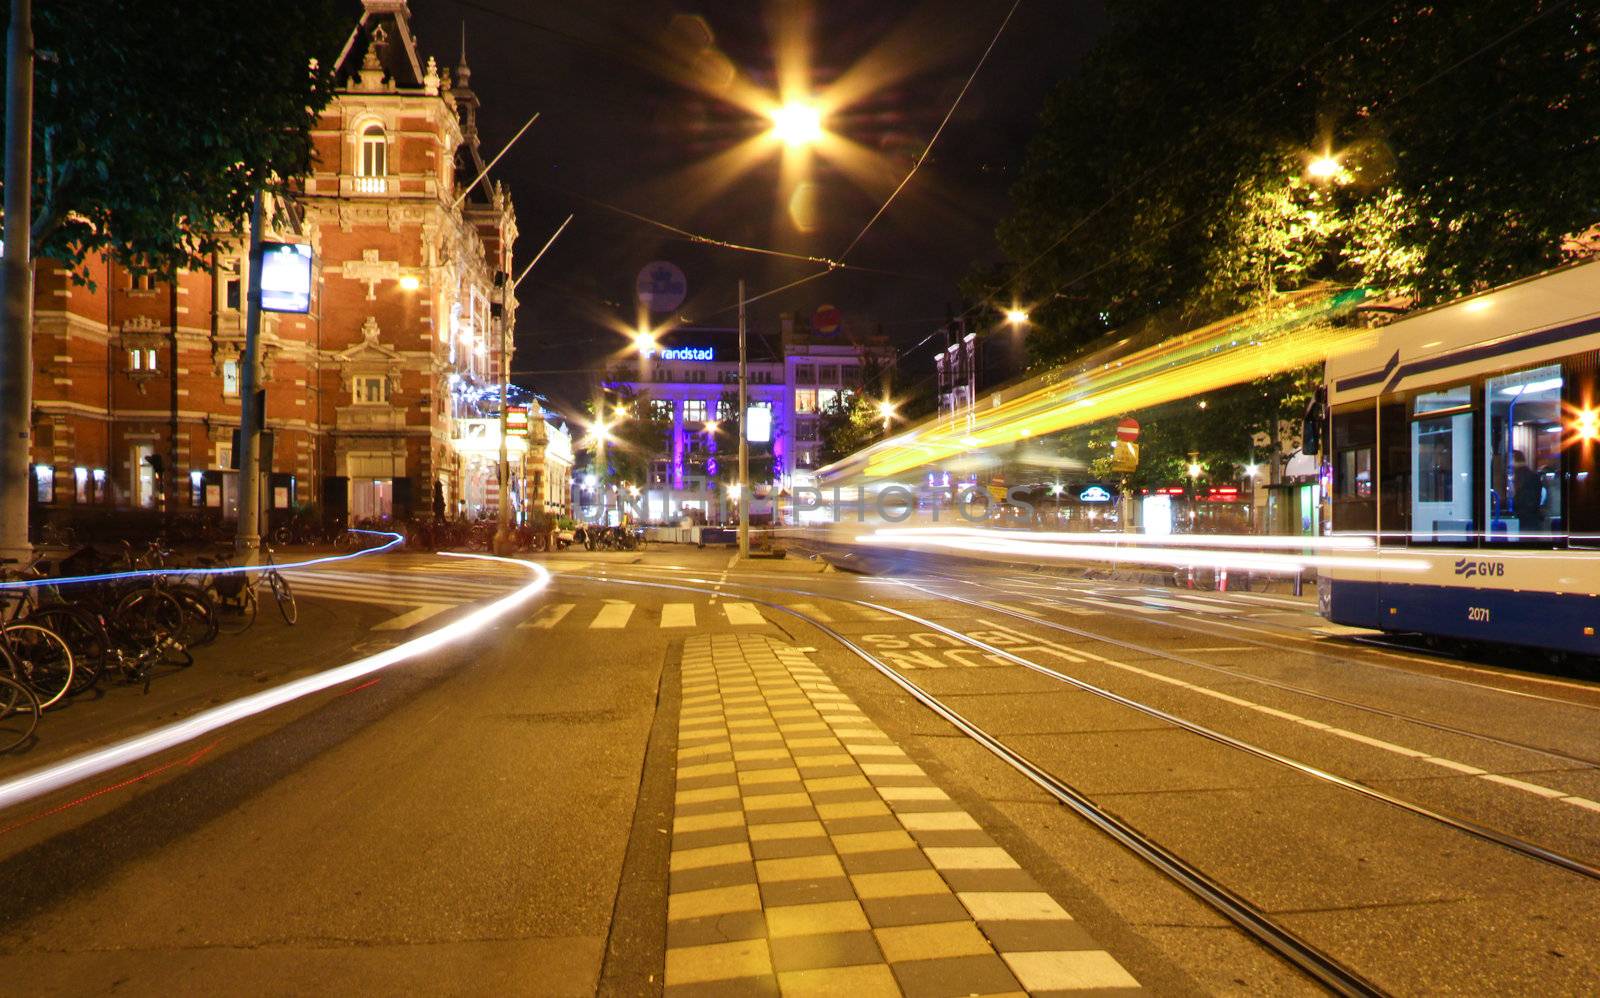 Amsterdam Leidseplein plaza at night by doble.d